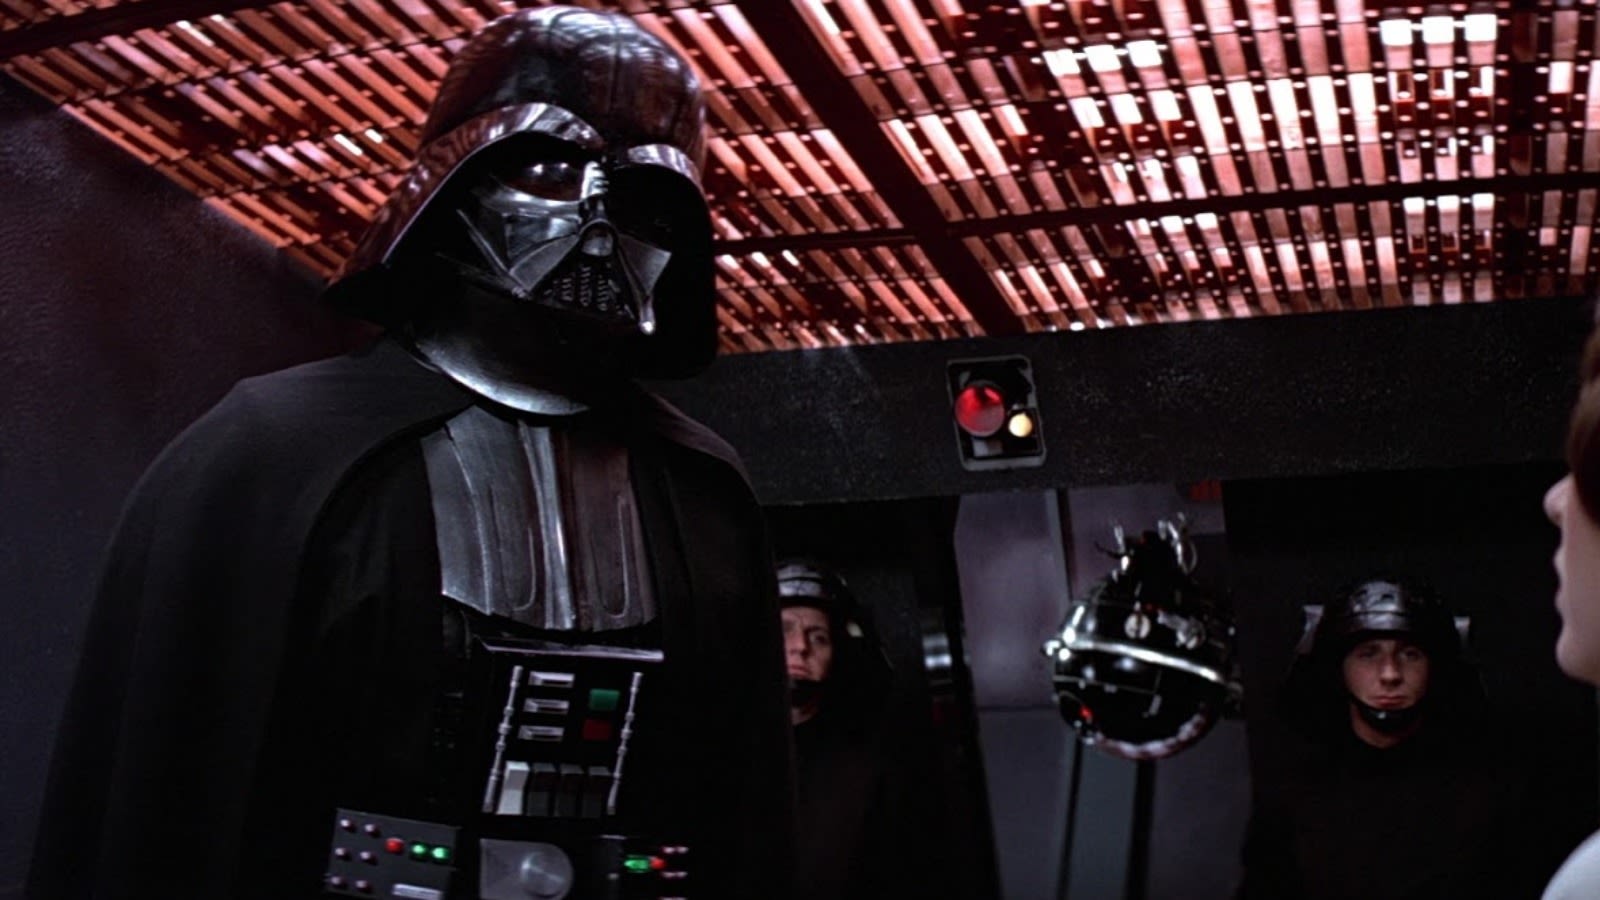 A Volcano Stopped The Voice And Body Of Star Wars' Darth Vader From Finally Meeting - SlashFilm